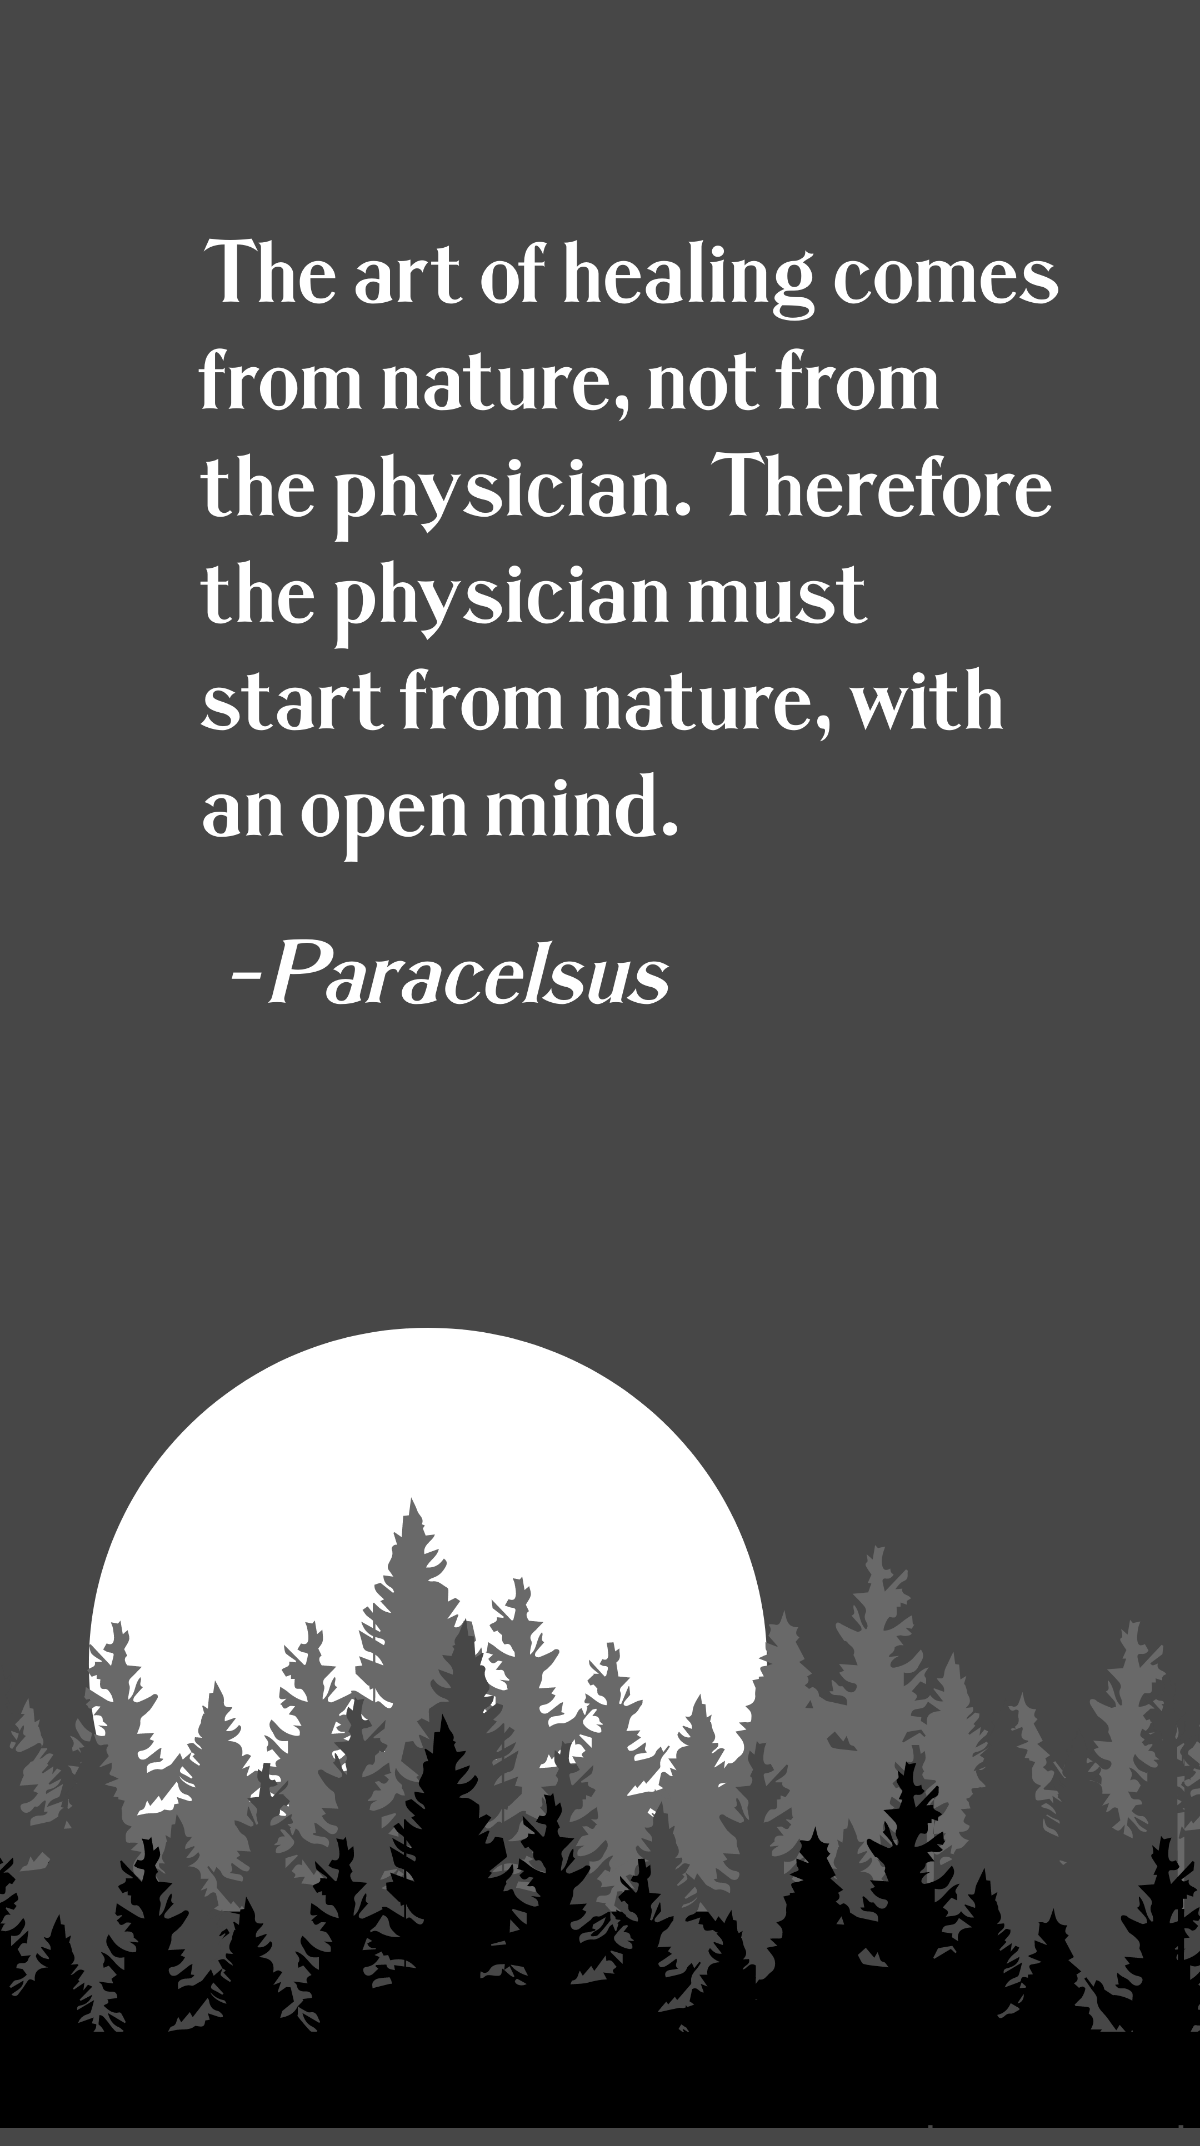 Paracelsus - The art of healing comes from nature, not from the physician. Therefore the physician must start from nature, with an open mind.